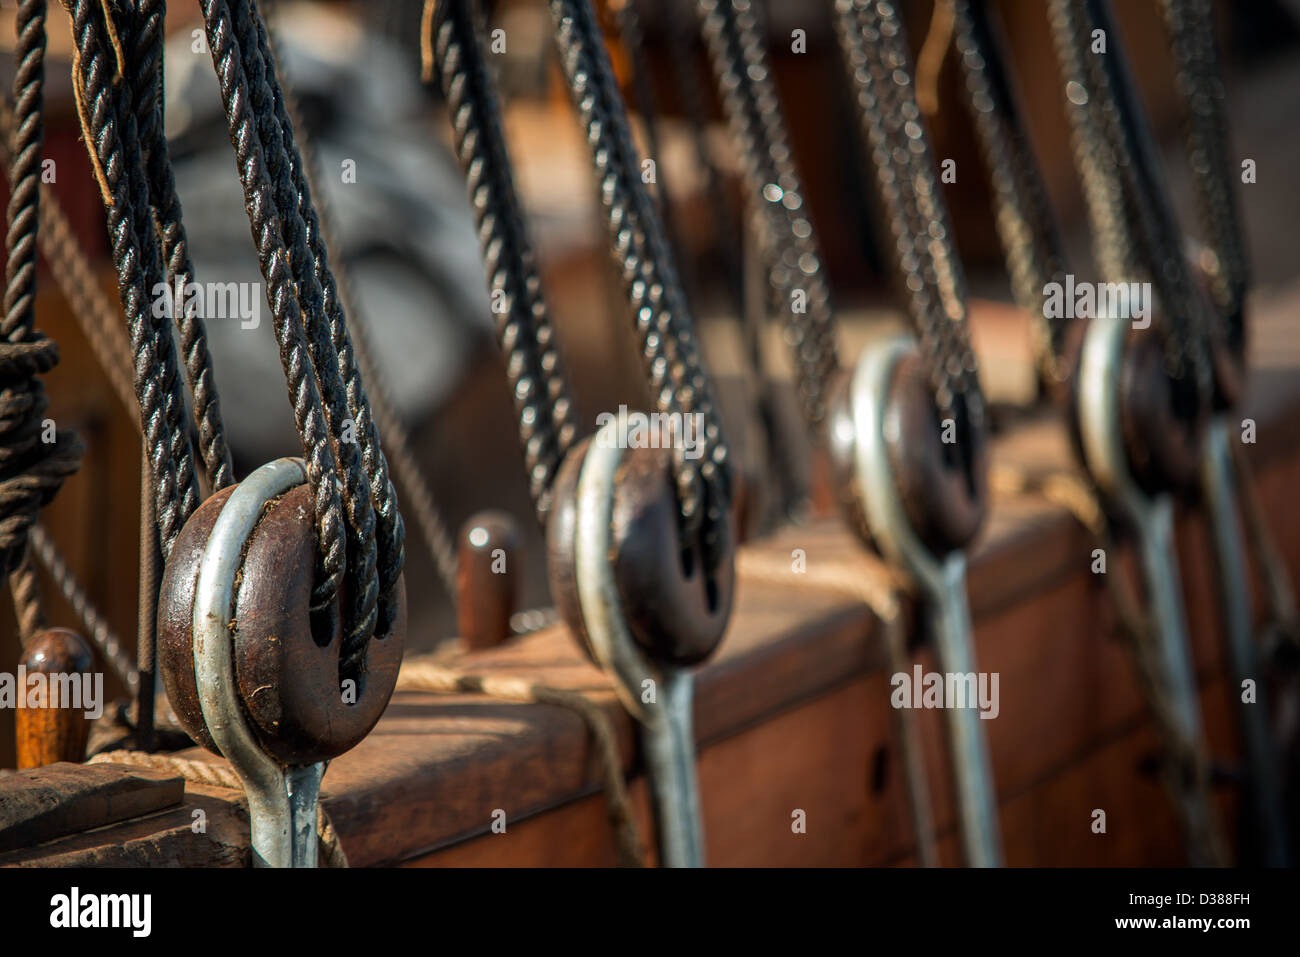 Looking along a row of tackle blocks and the rigging of a 19th century tall ship. Selective focus. Stock Photo